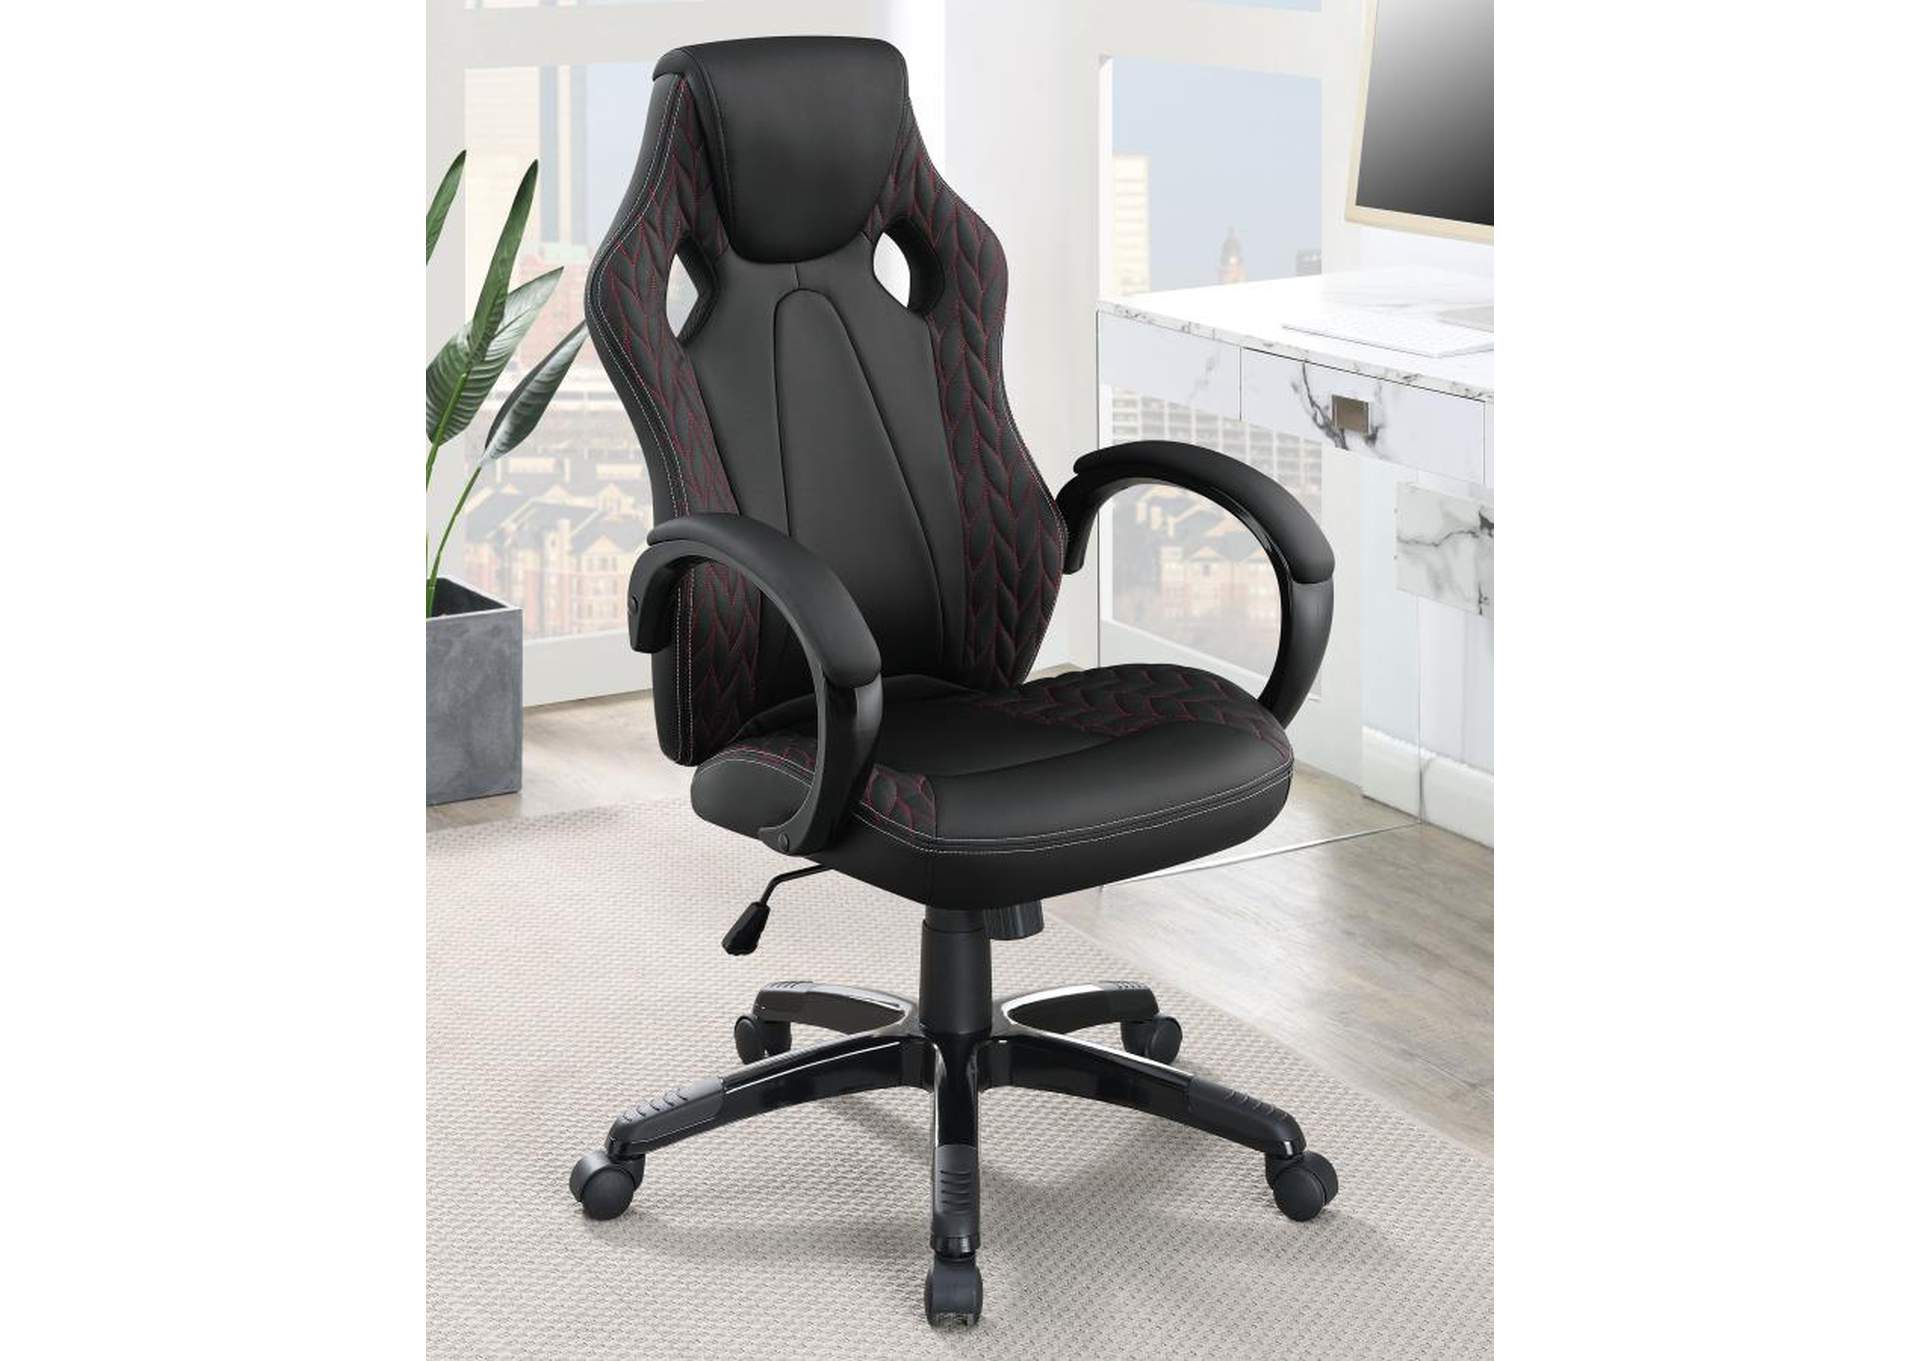 Carlos Arched Armrest Upholstered Office Chair Black,Coaster Furniture